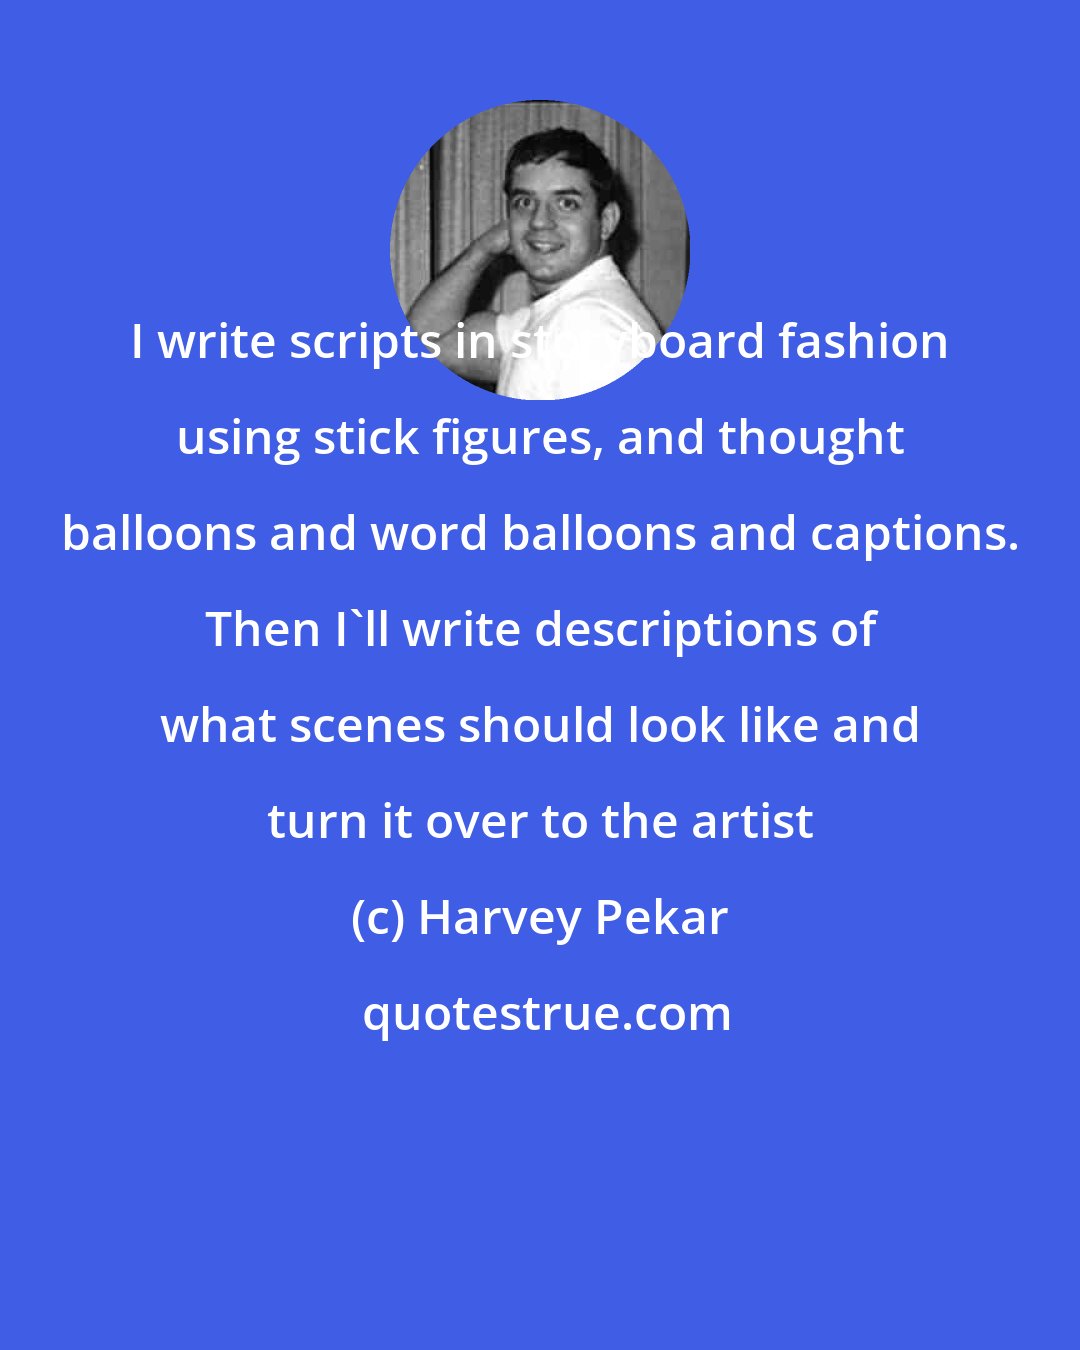 Harvey Pekar: I write scripts in storyboard fashion using stick figures, and thought balloons and word balloons and captions. Then I'll write descriptions of what scenes should look like and turn it over to the artist